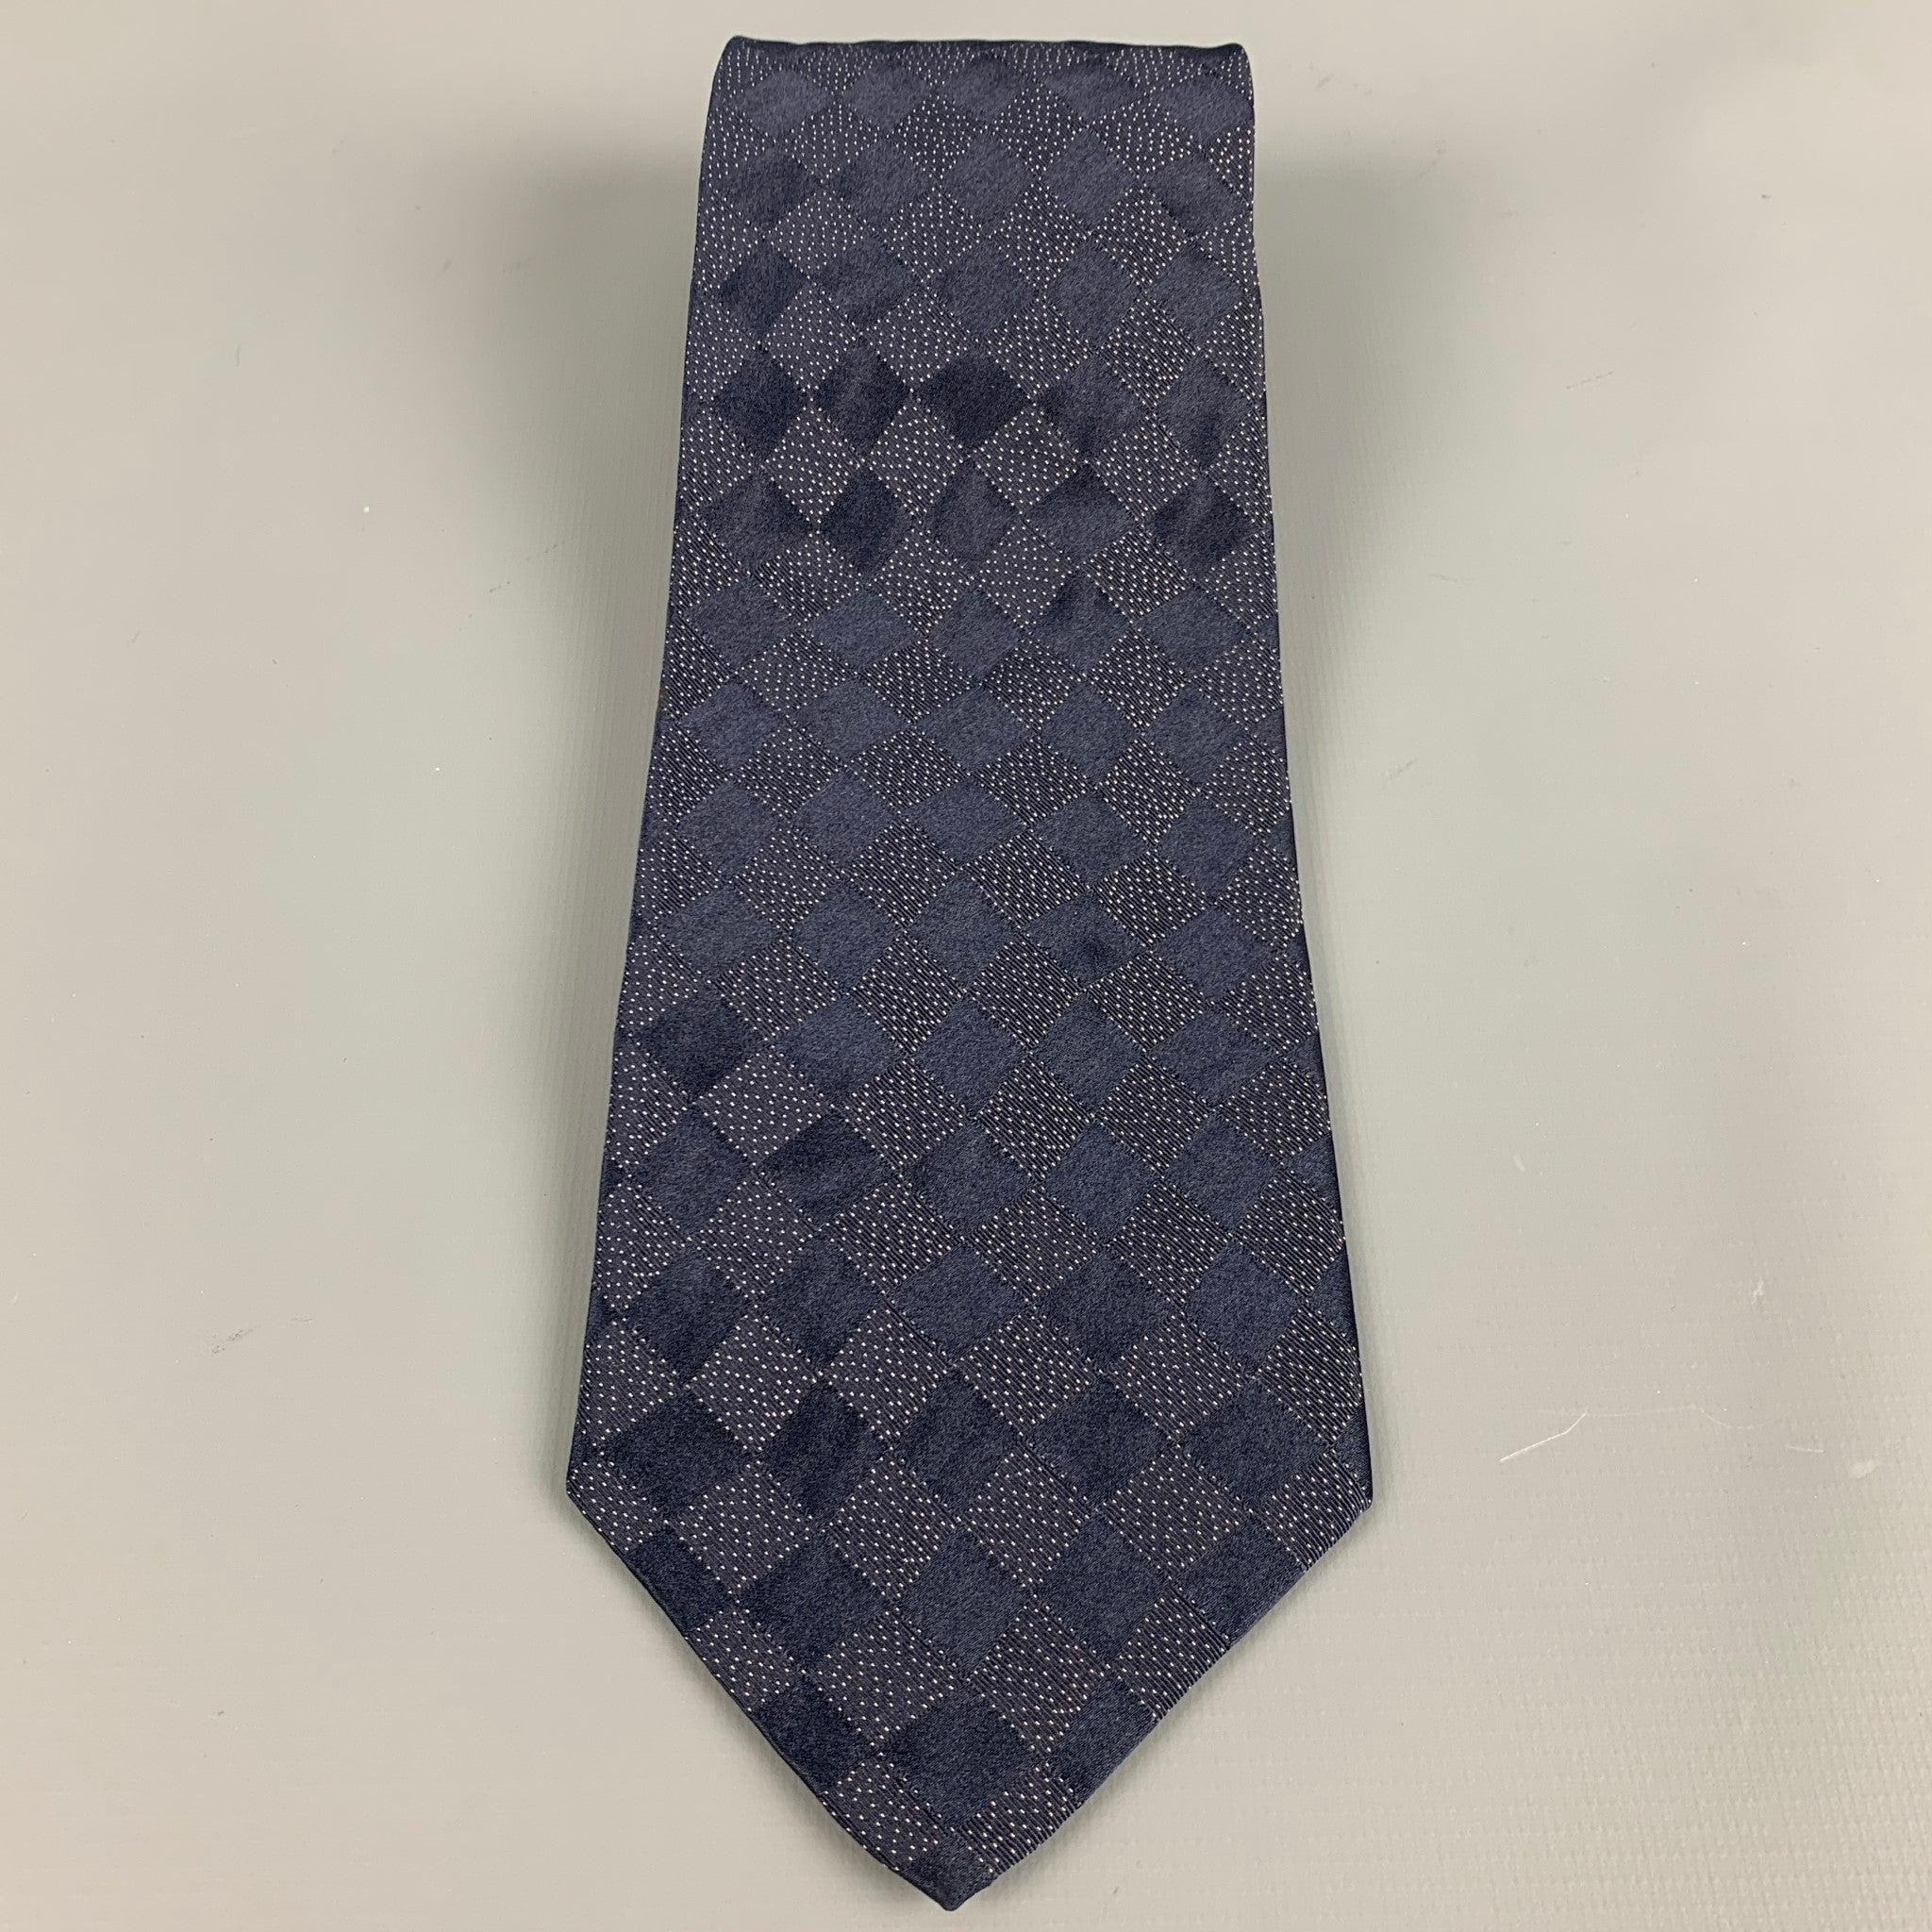 DONNA KARANnecktie in a navy silk fabric featuring checkered pattern with white dots. Made in USA.Excellent Pre-Owned Condition. 

Measurements: 
  Width: 3.5 inches Length: 58 inches 
  
  
 
Reference: 127317
Category: Tie
More Details
    
Brand: